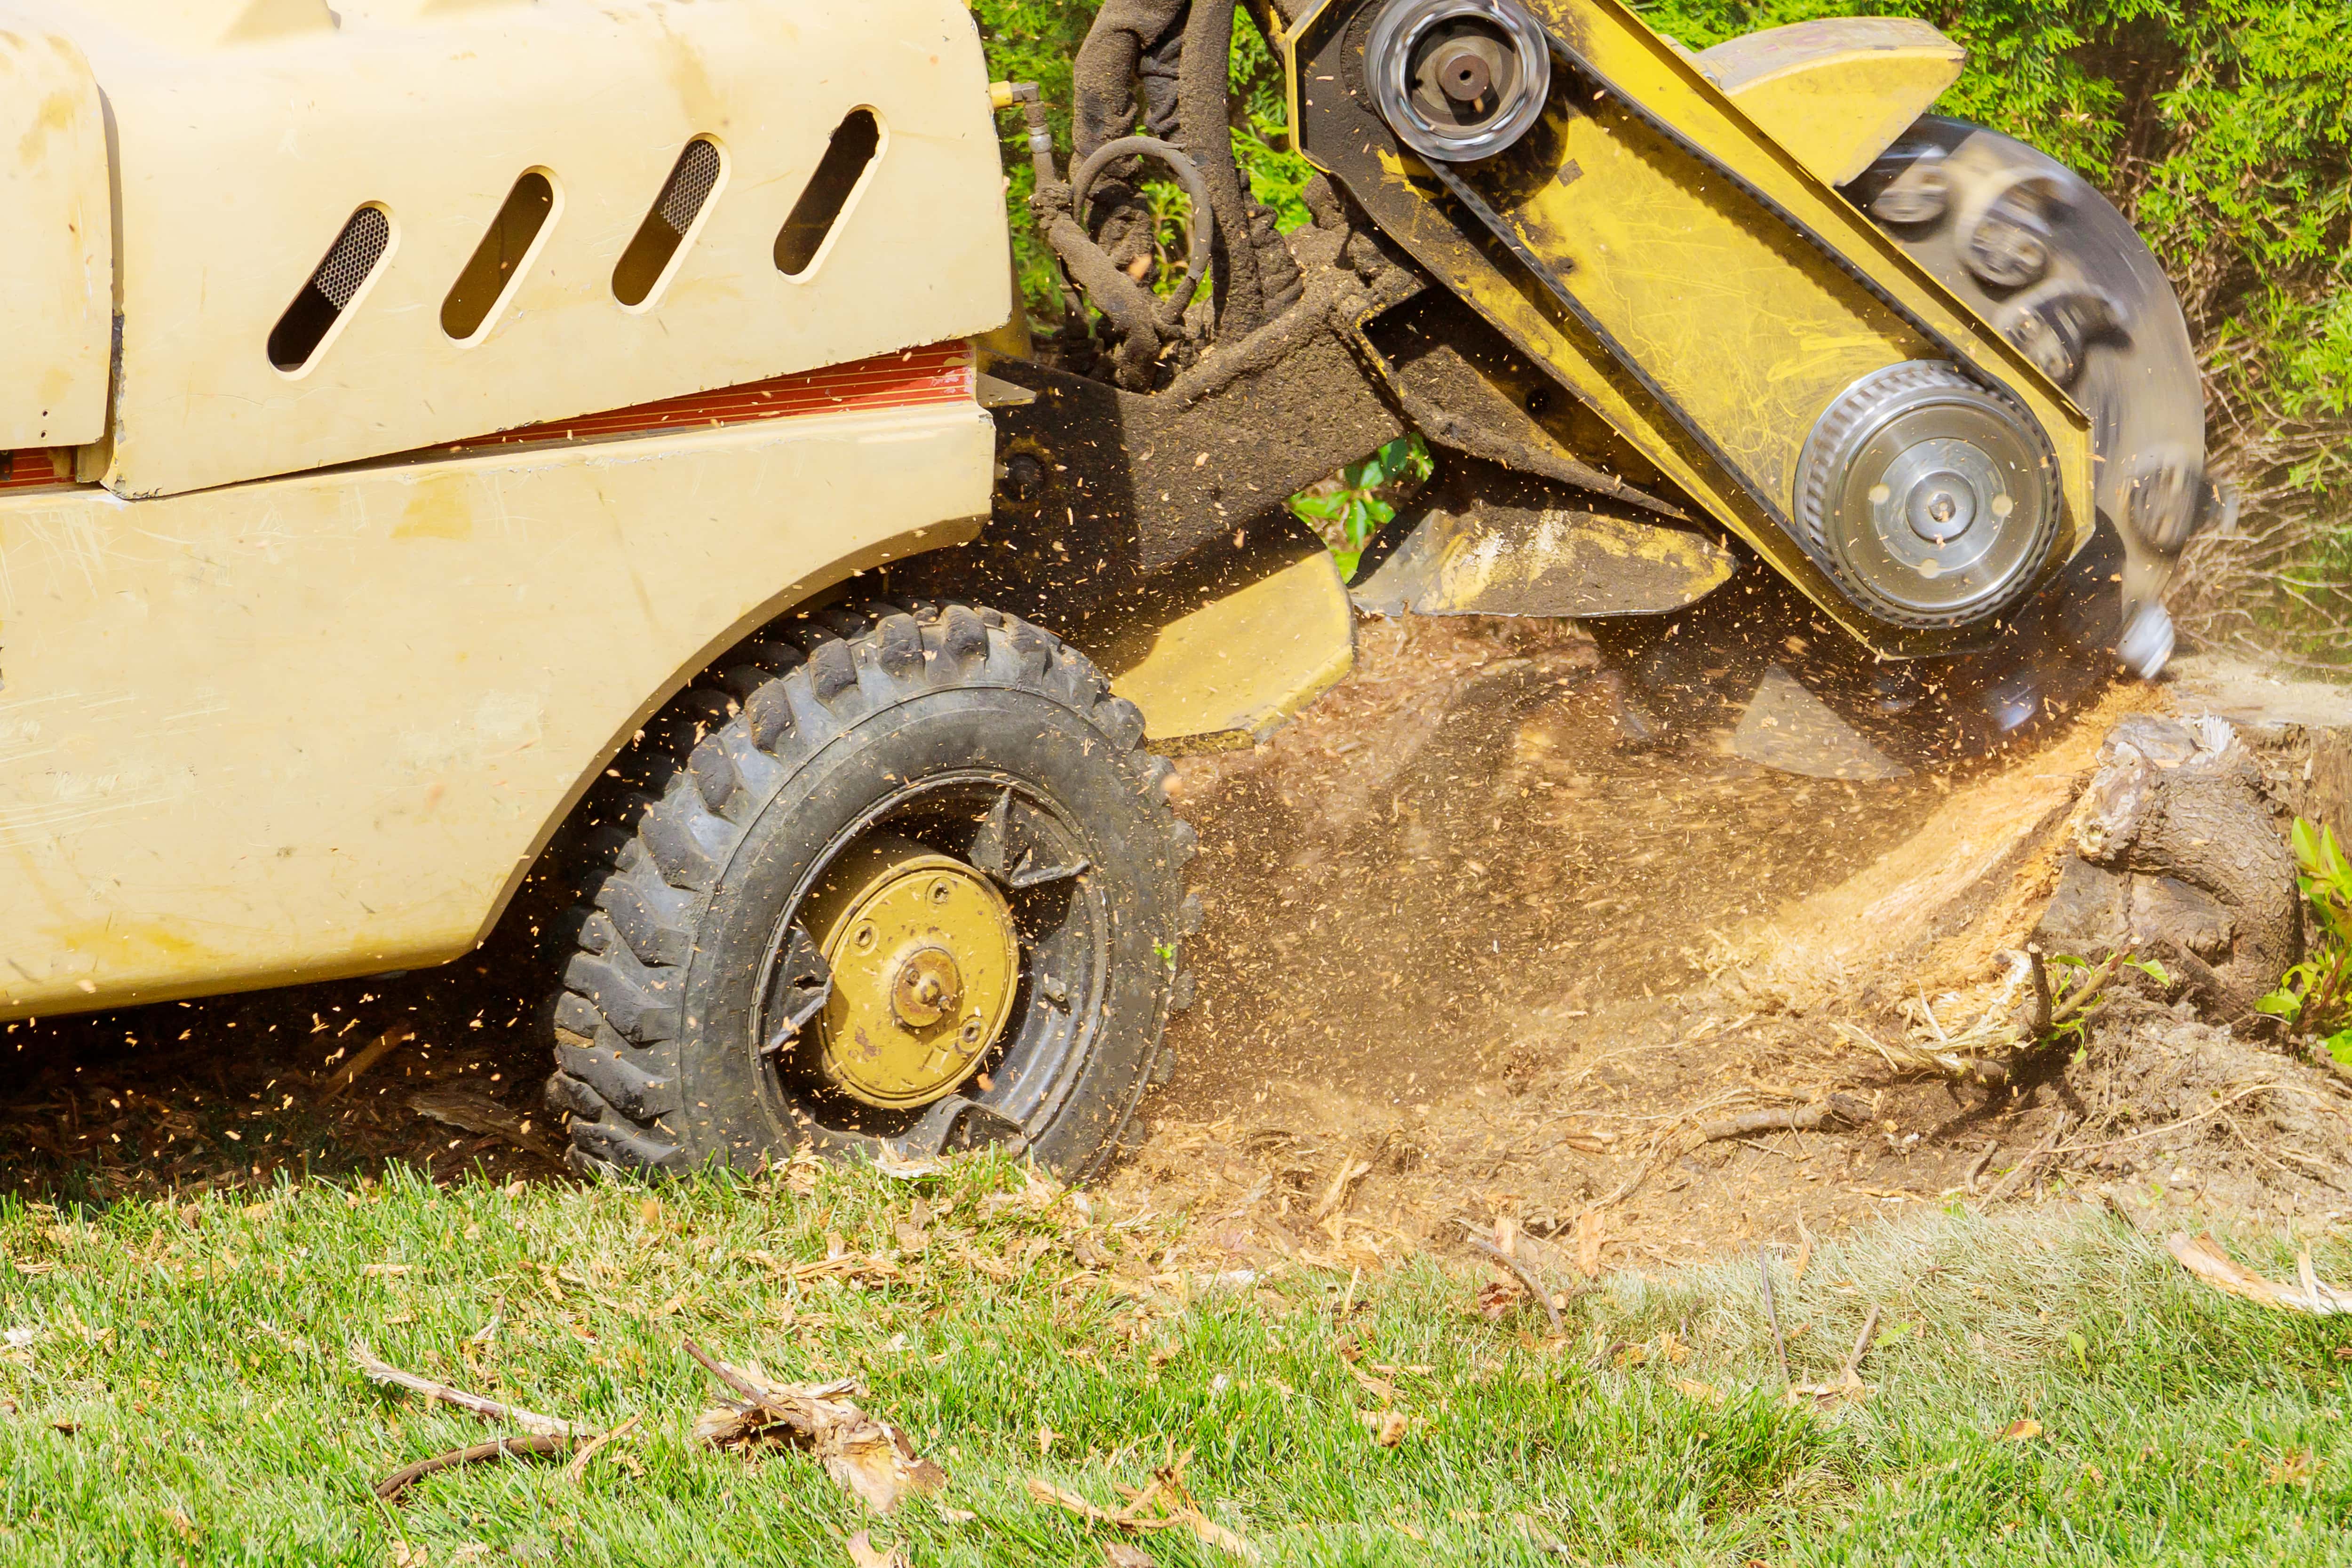 an image of a stump grinding machine